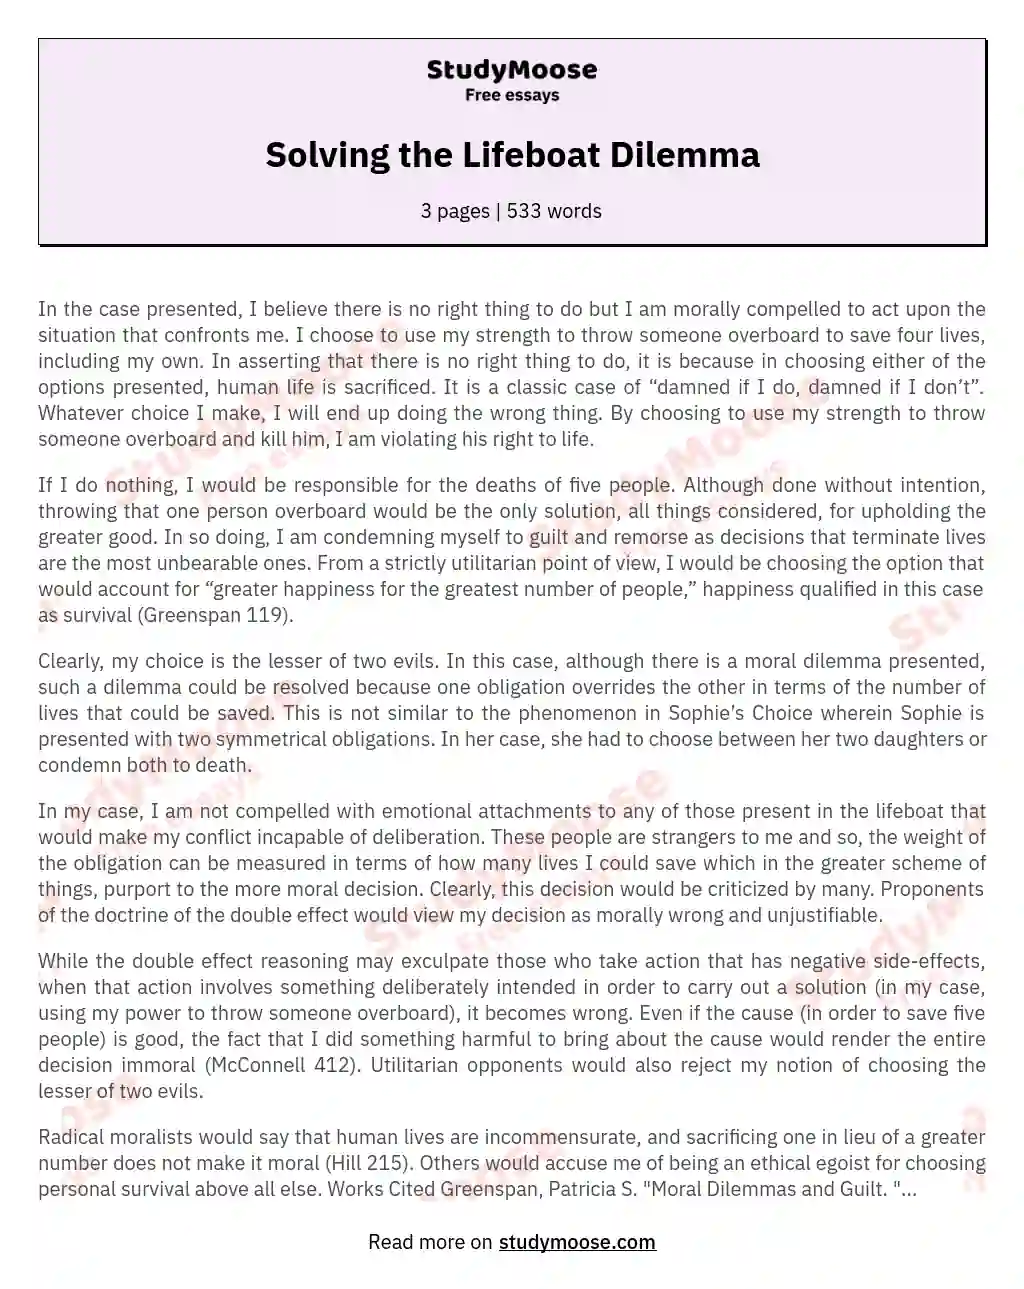 Solving the Lifeboat Dilemma essay